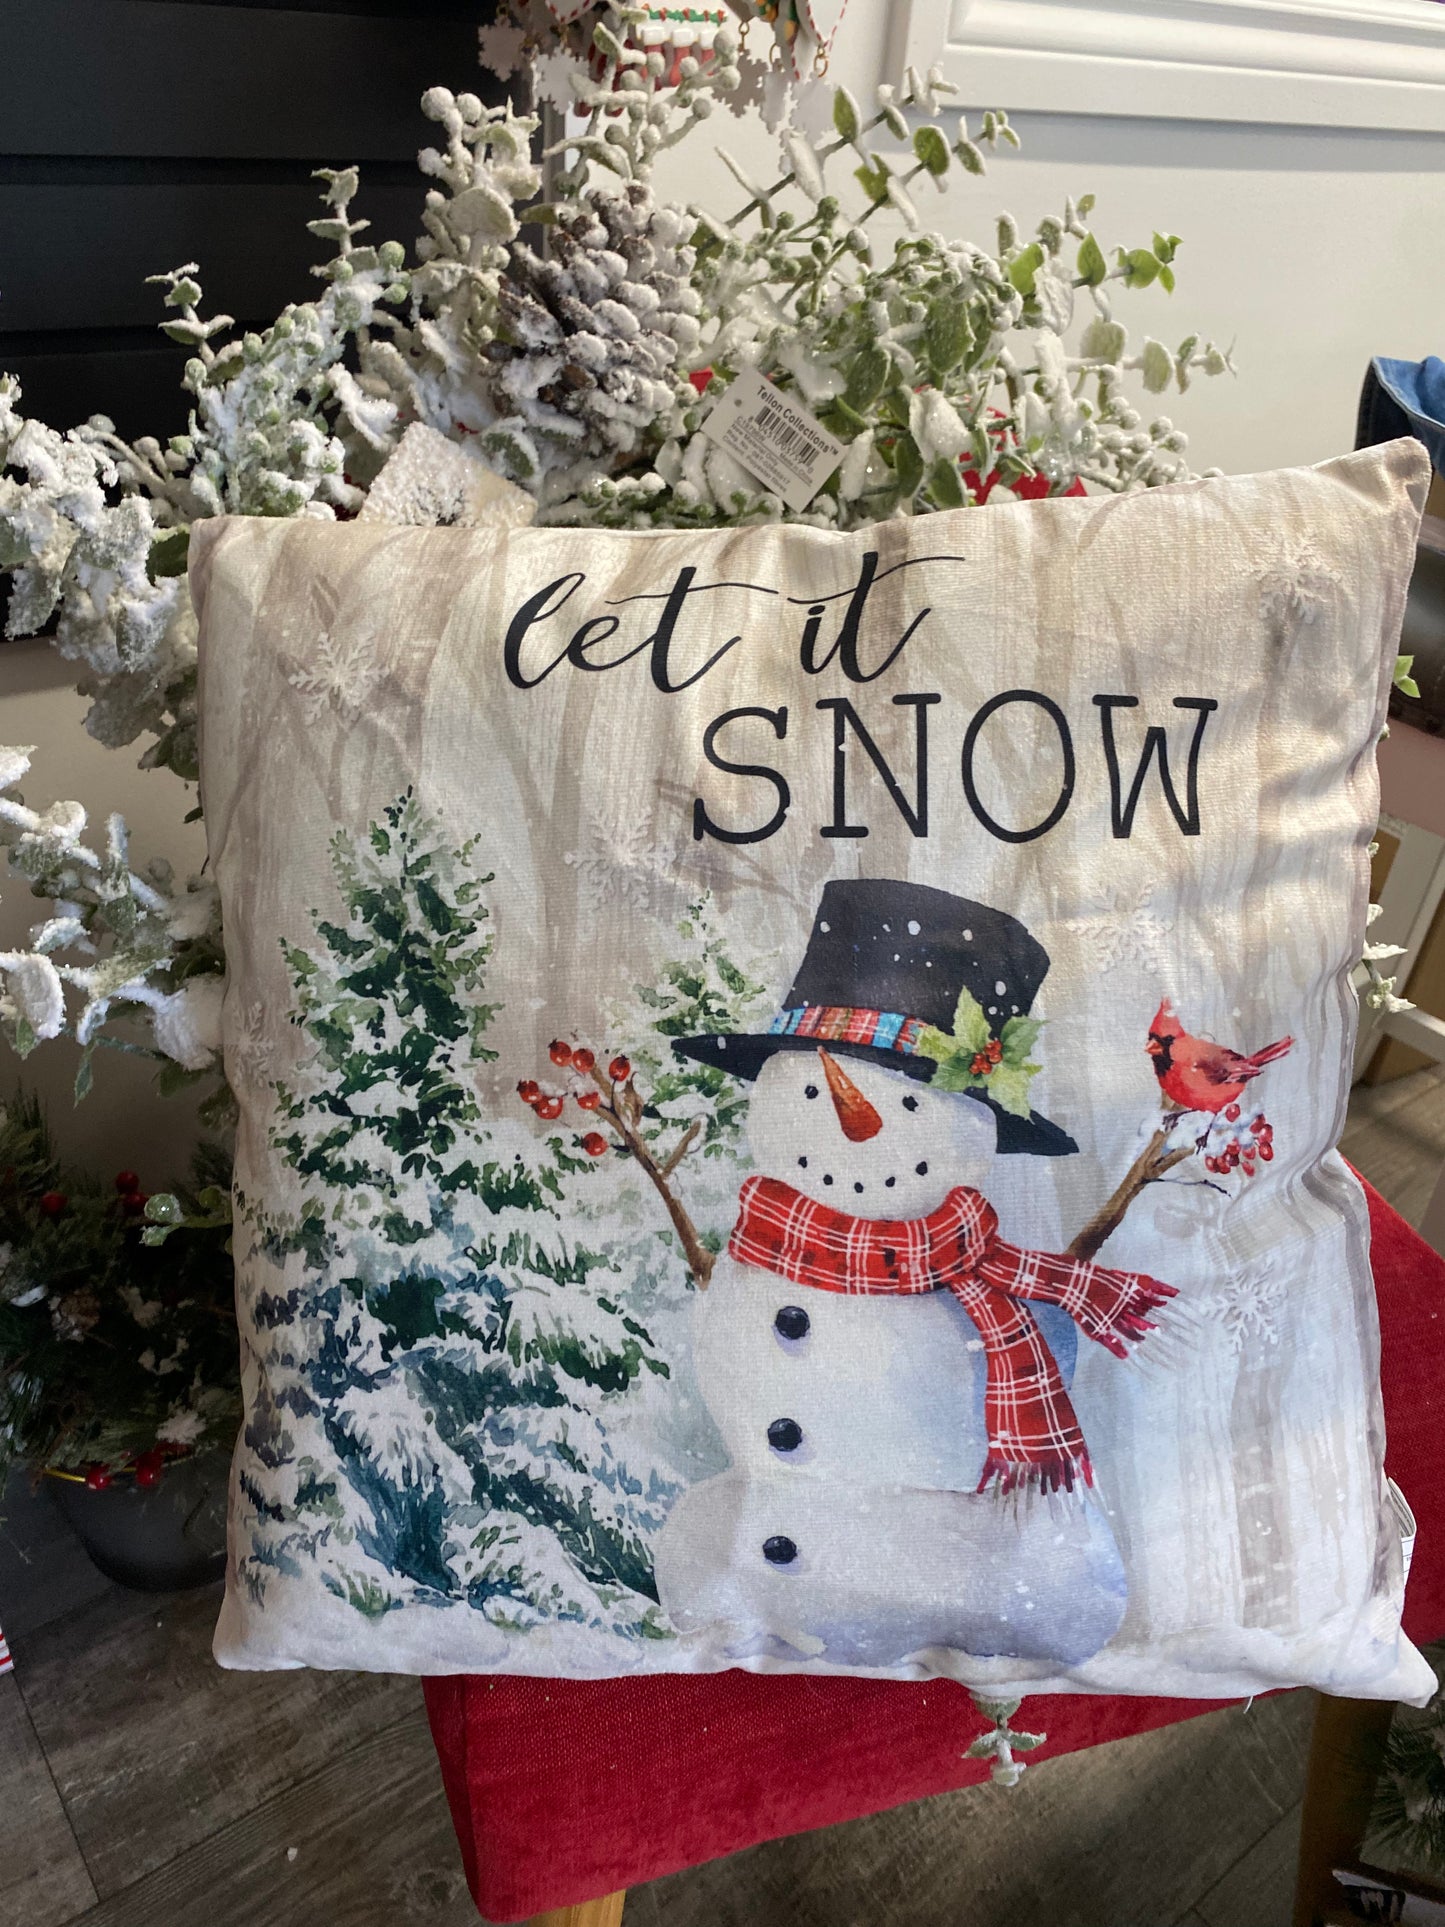 LED Cushion, Snowman Holding Cardinal with Sentiment “Let it Snow”